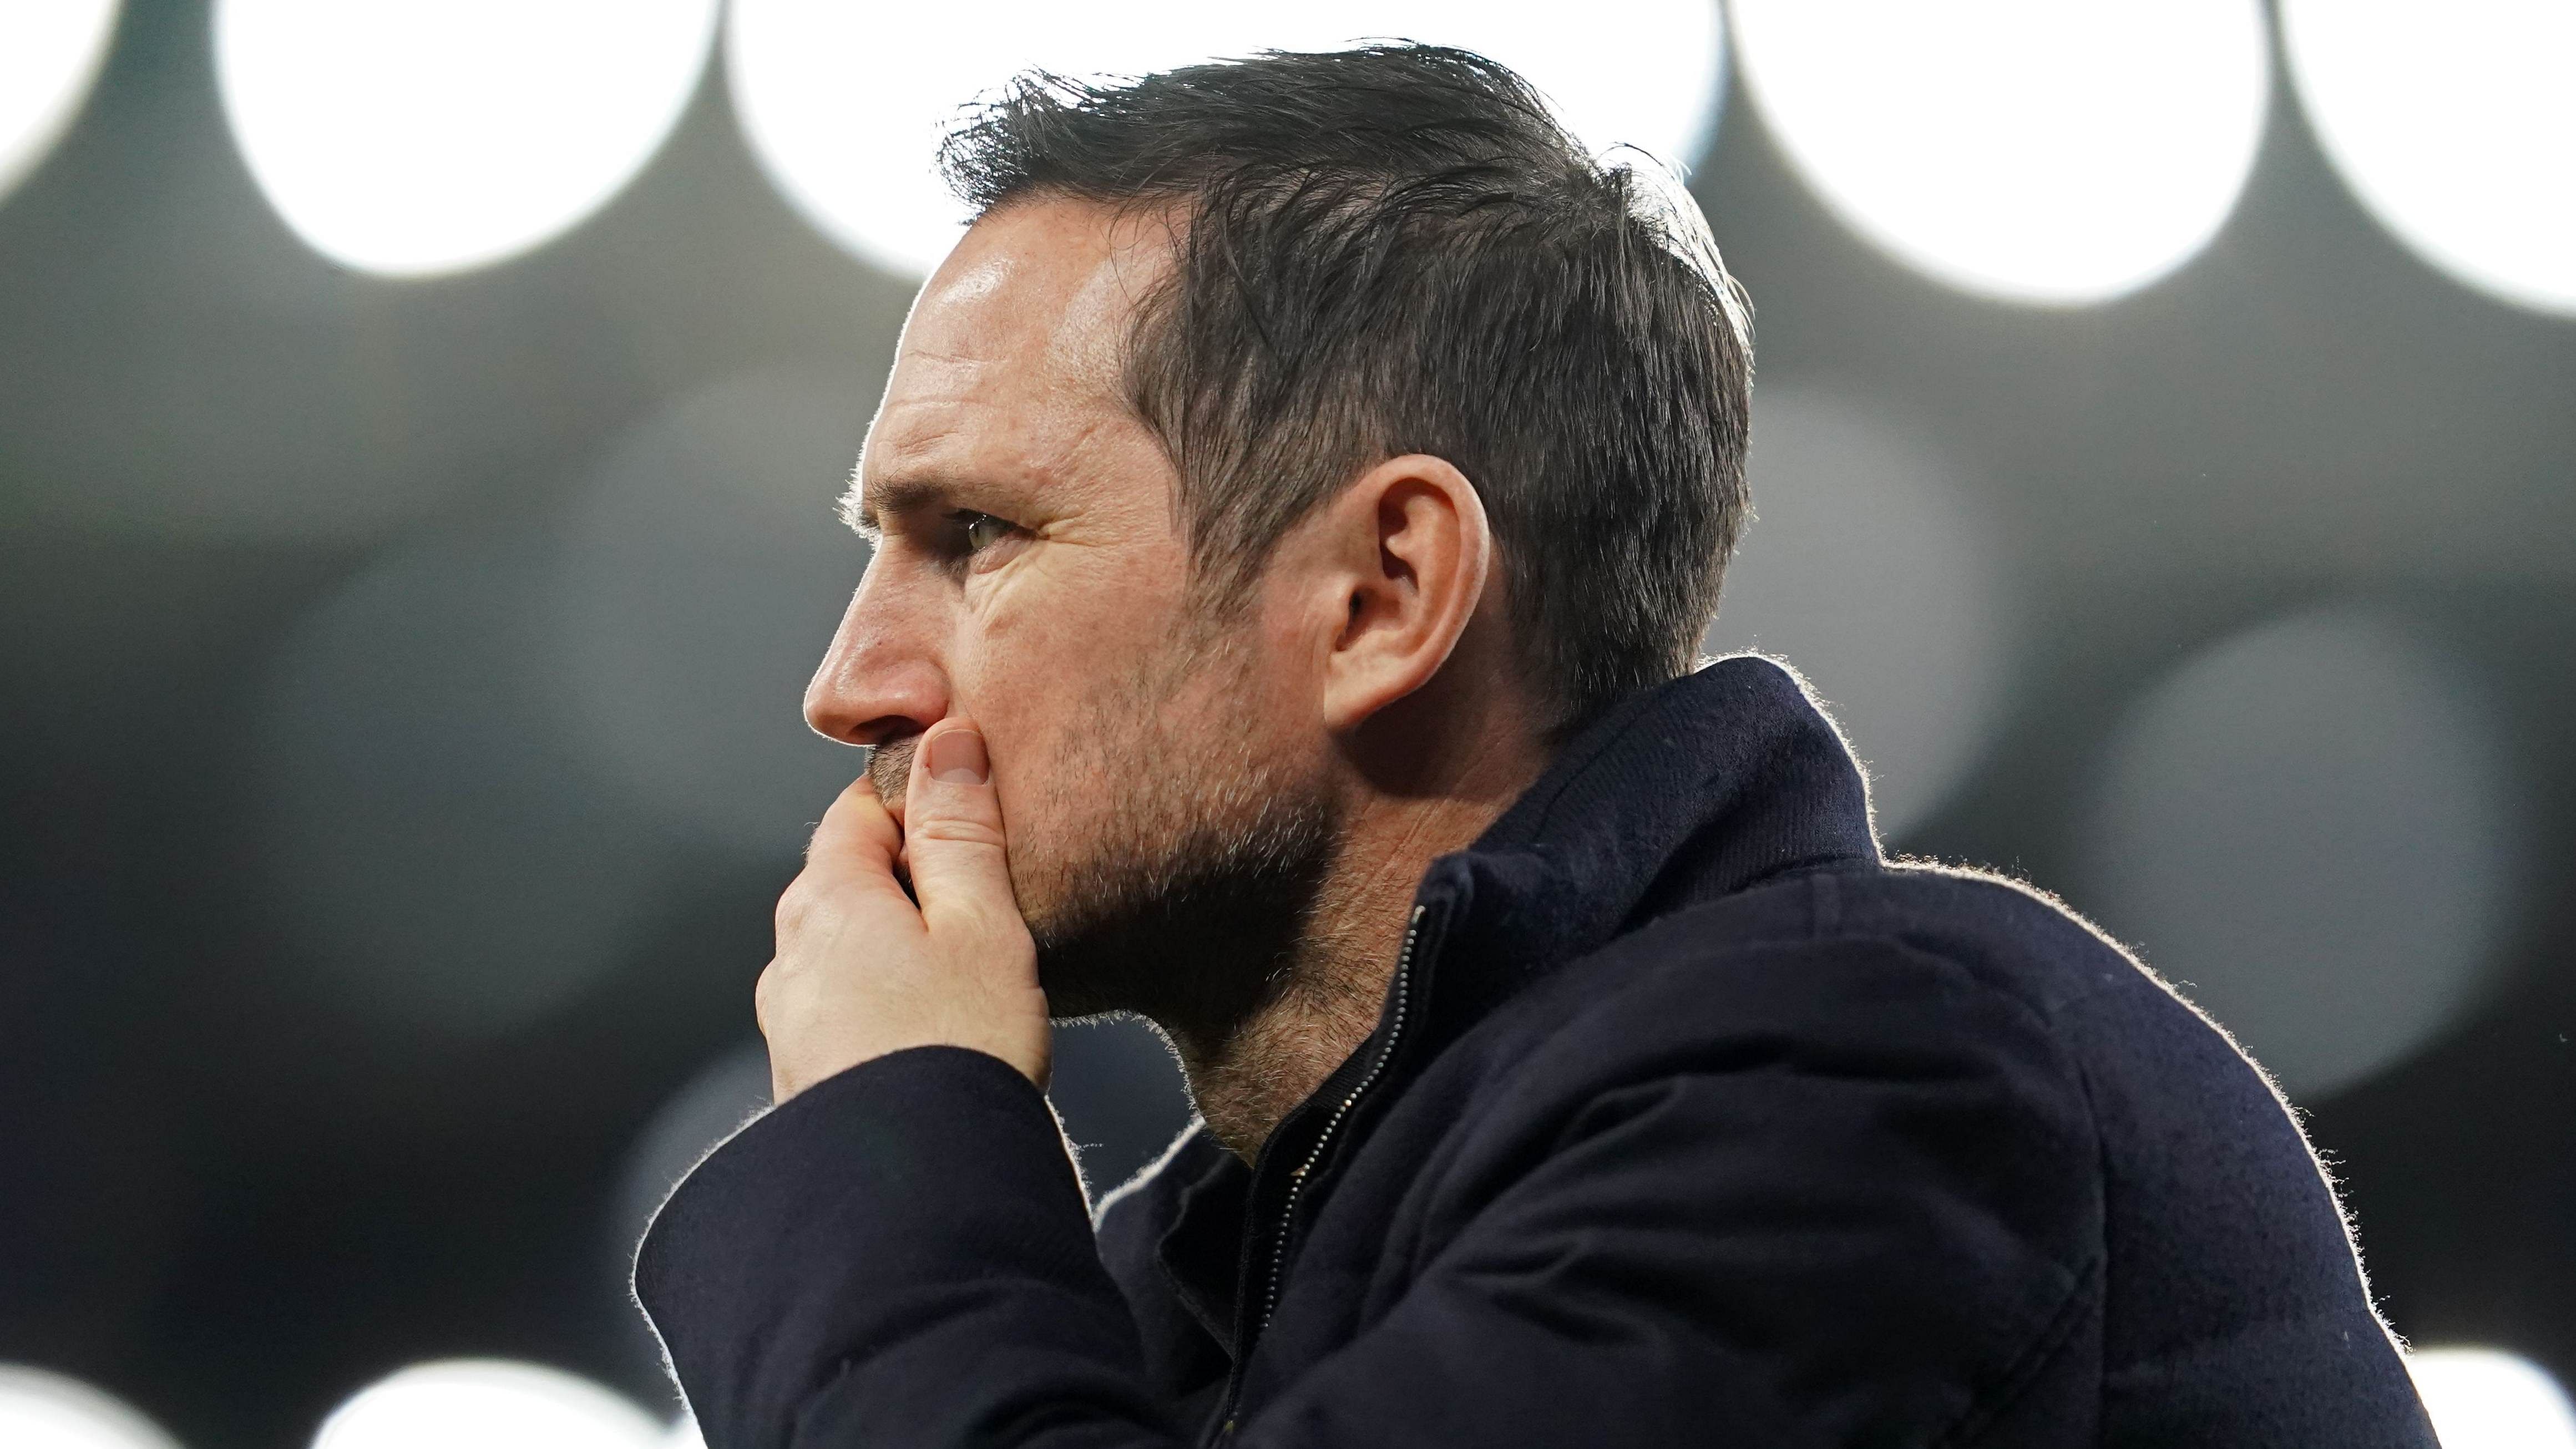 Chelsea's English head coach Frank Lampard comes out to give an interview before the English Premier League football match between Everton and Chelsea at Goodison Park in Liverpool, north west England. Credit: AFP